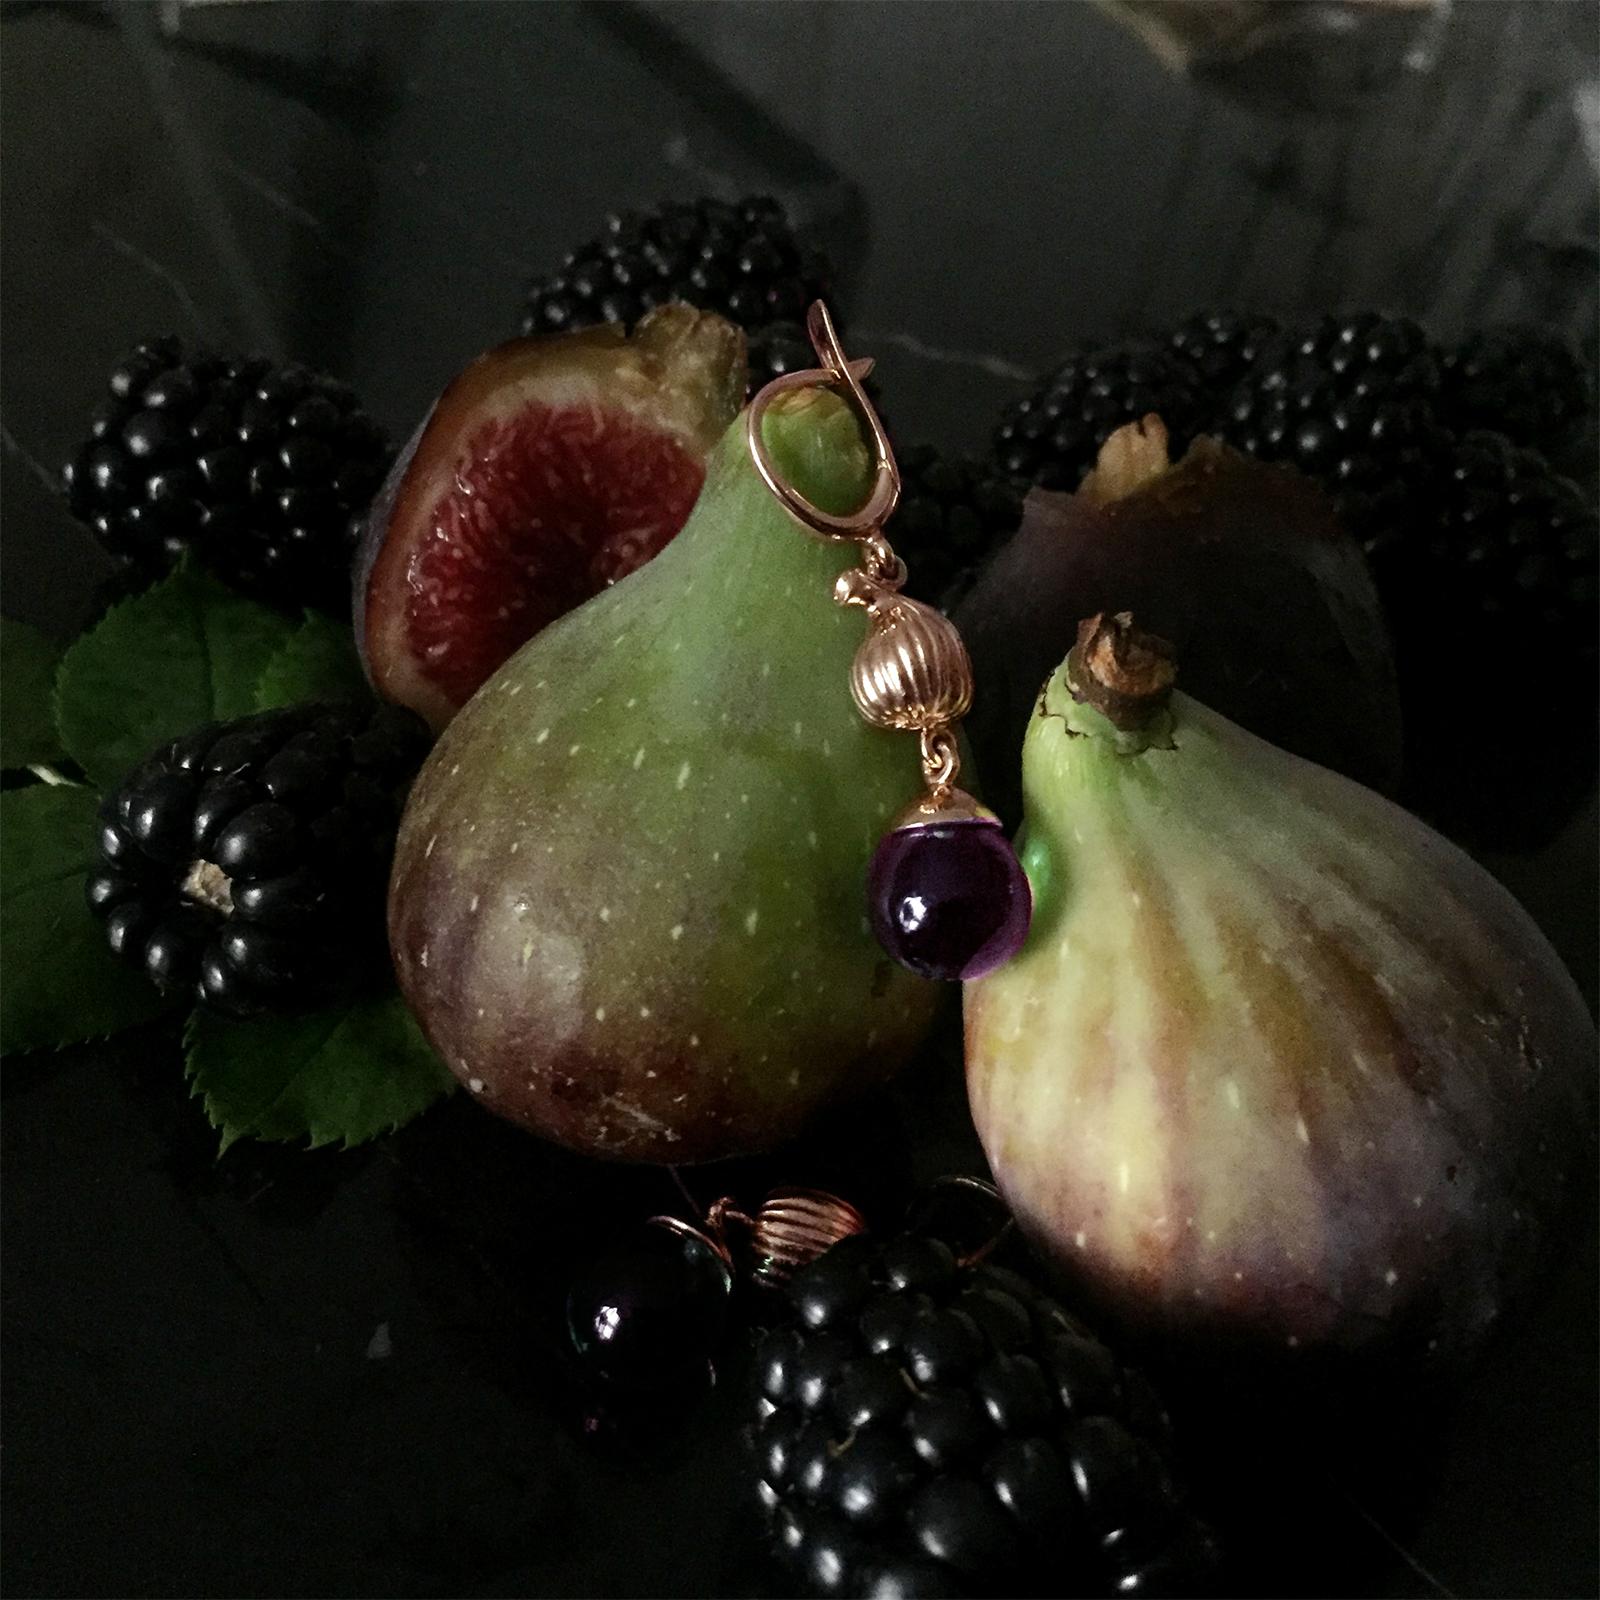 These Fig Fruits cocktail earrings are made of 18 karat rose gold and feature detachable cabochon amethyst drops that allow light to pass through and two black diamonds. They were designed by the artist Polya Medvedeva and were featured in a Vogue